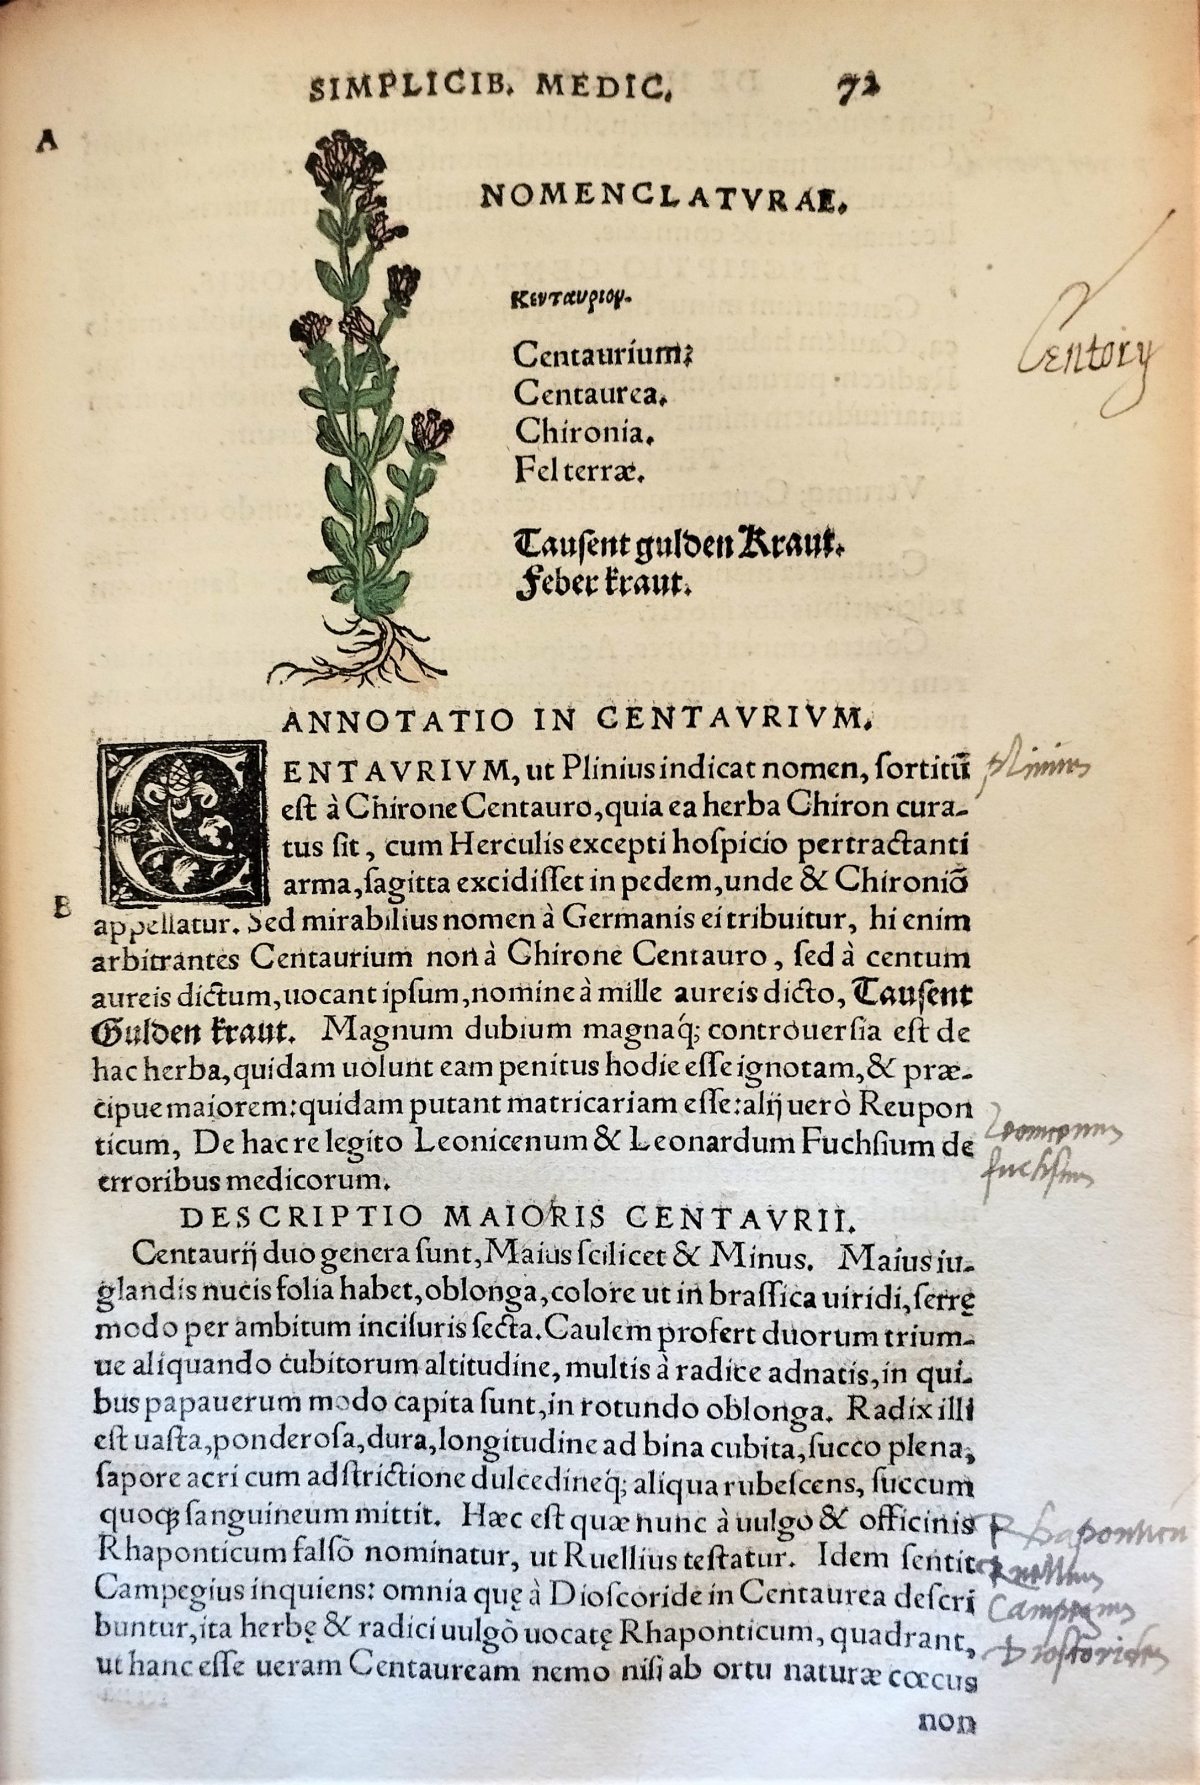 Page with the nomenclature, latin text description and hand painted illustration of the centaury plant and flowers.